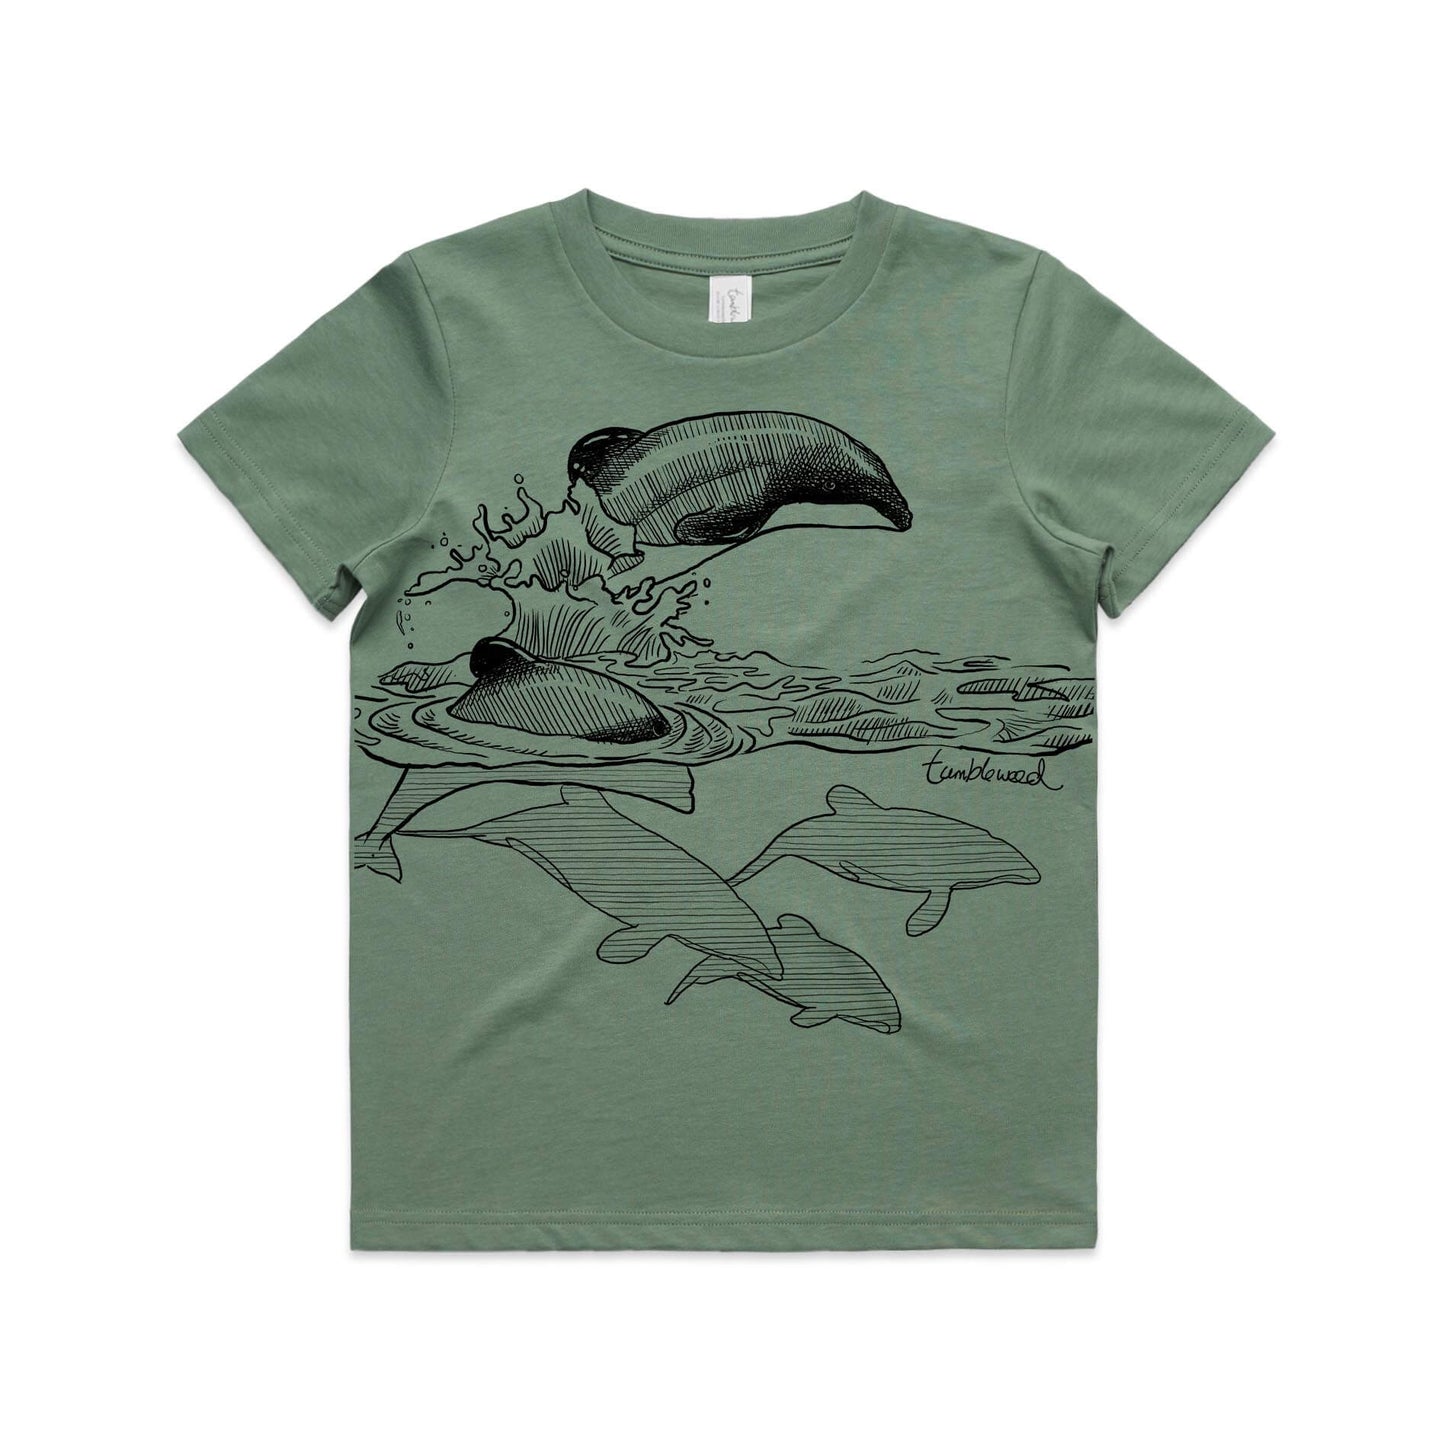 Sage, cotton kids' t-shirt with screen printed ducks maui dolphin design.